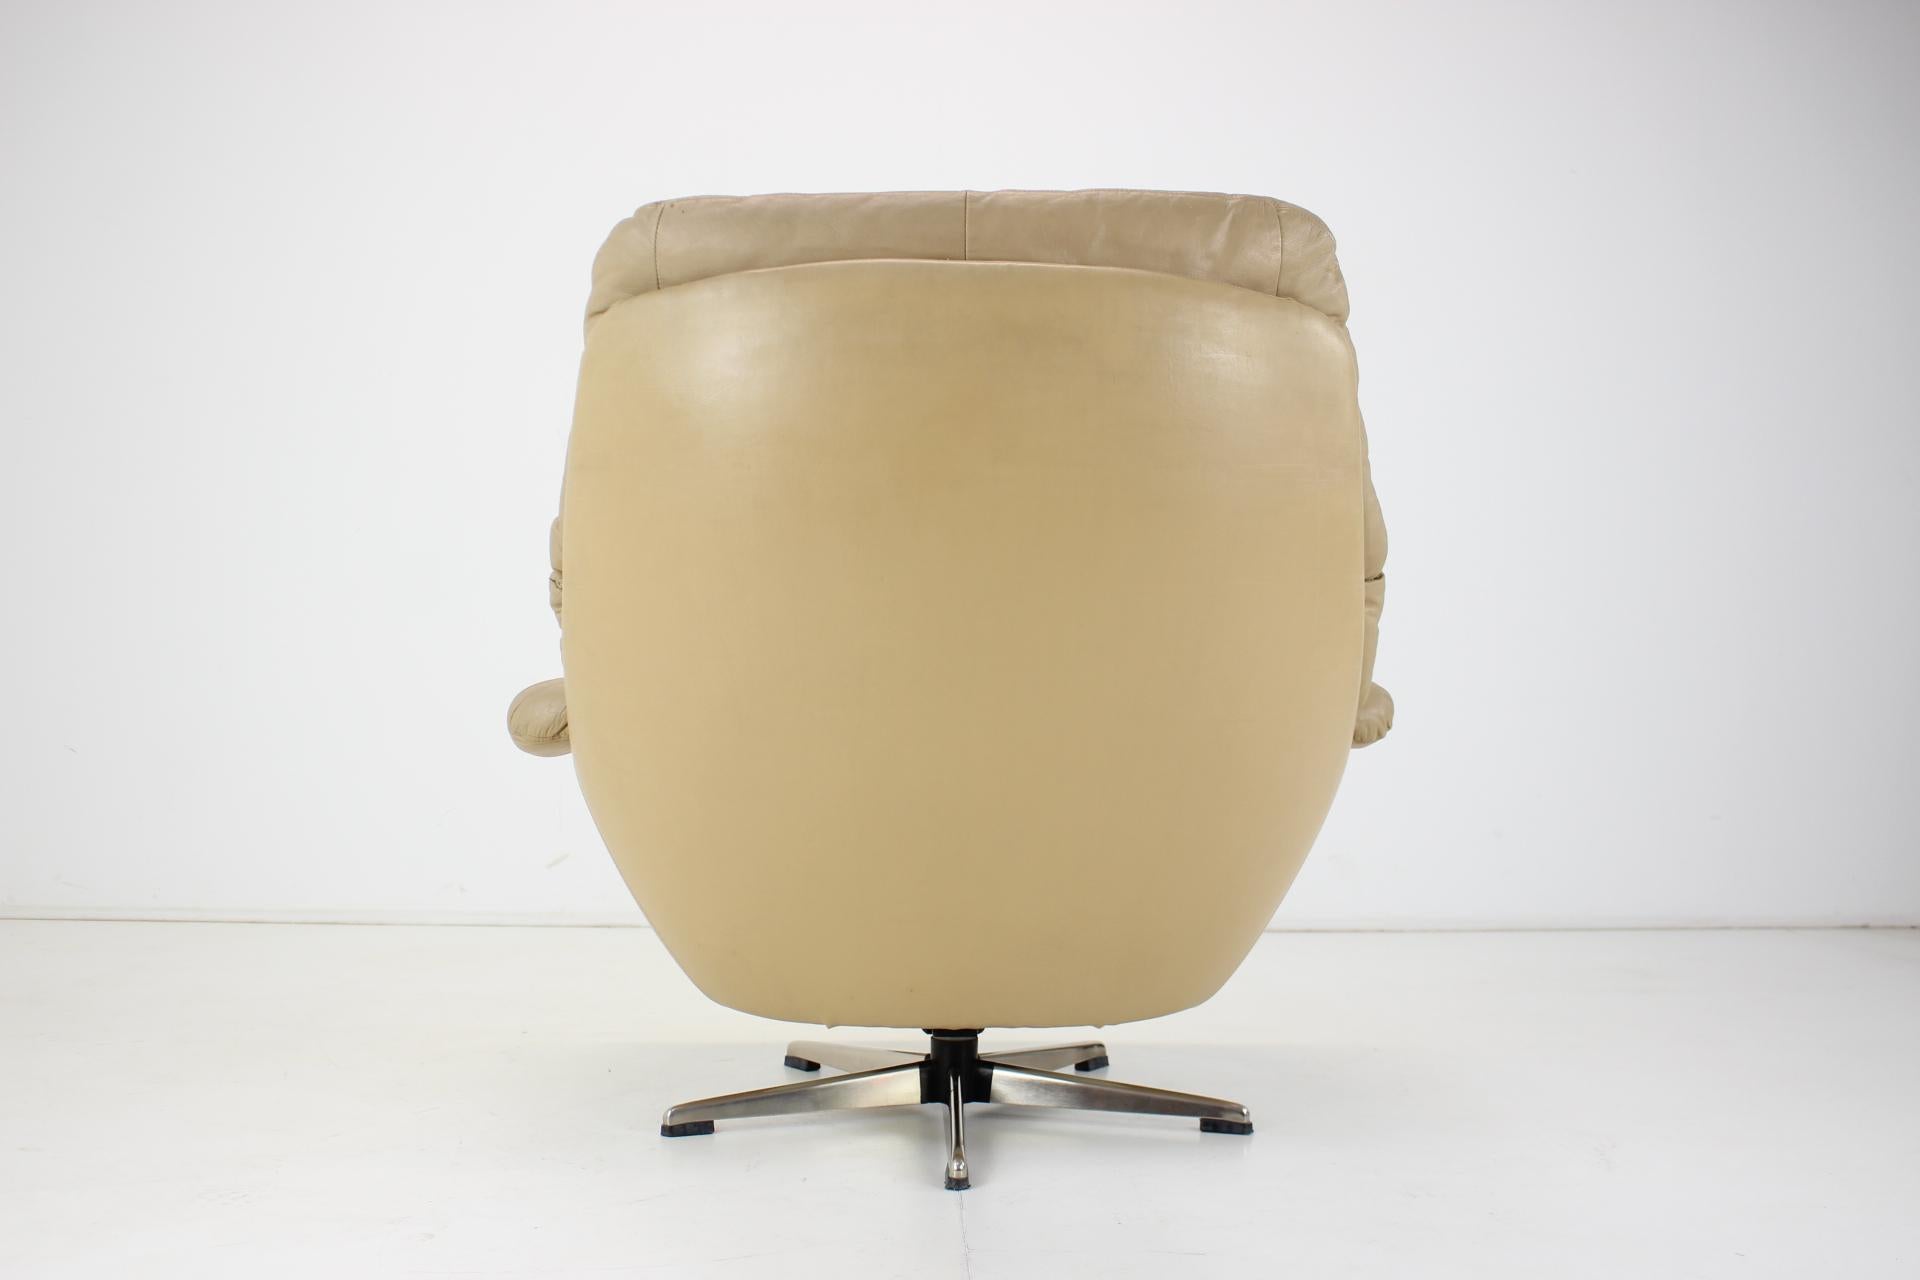 Large Scandinavian Adjustable Leather Armchair by Peem, 1970s, Finland For Sale 2